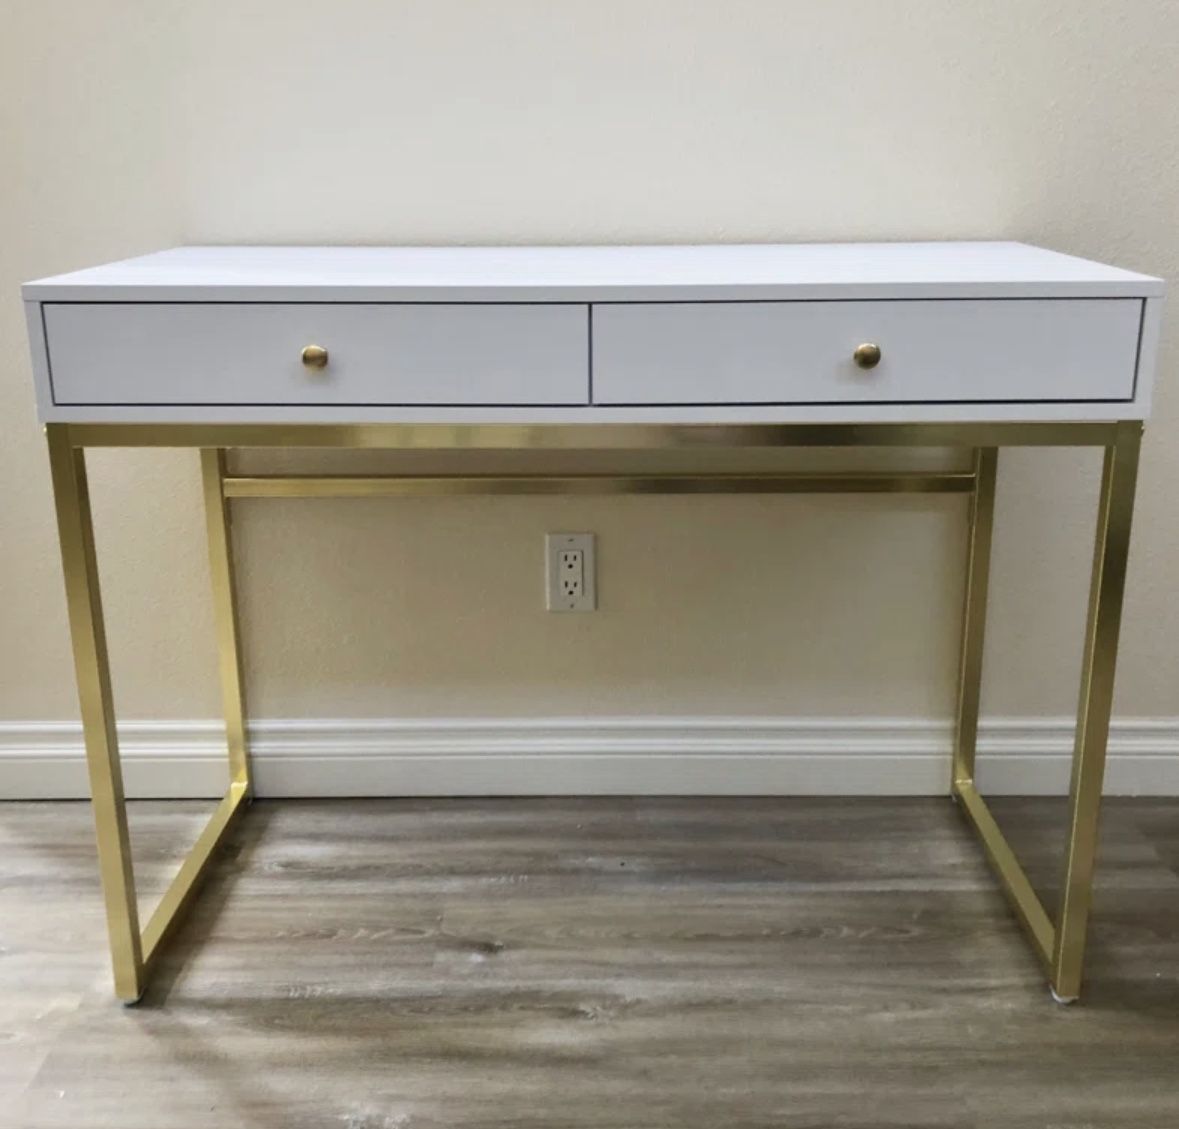 White Desk with Metal Base 